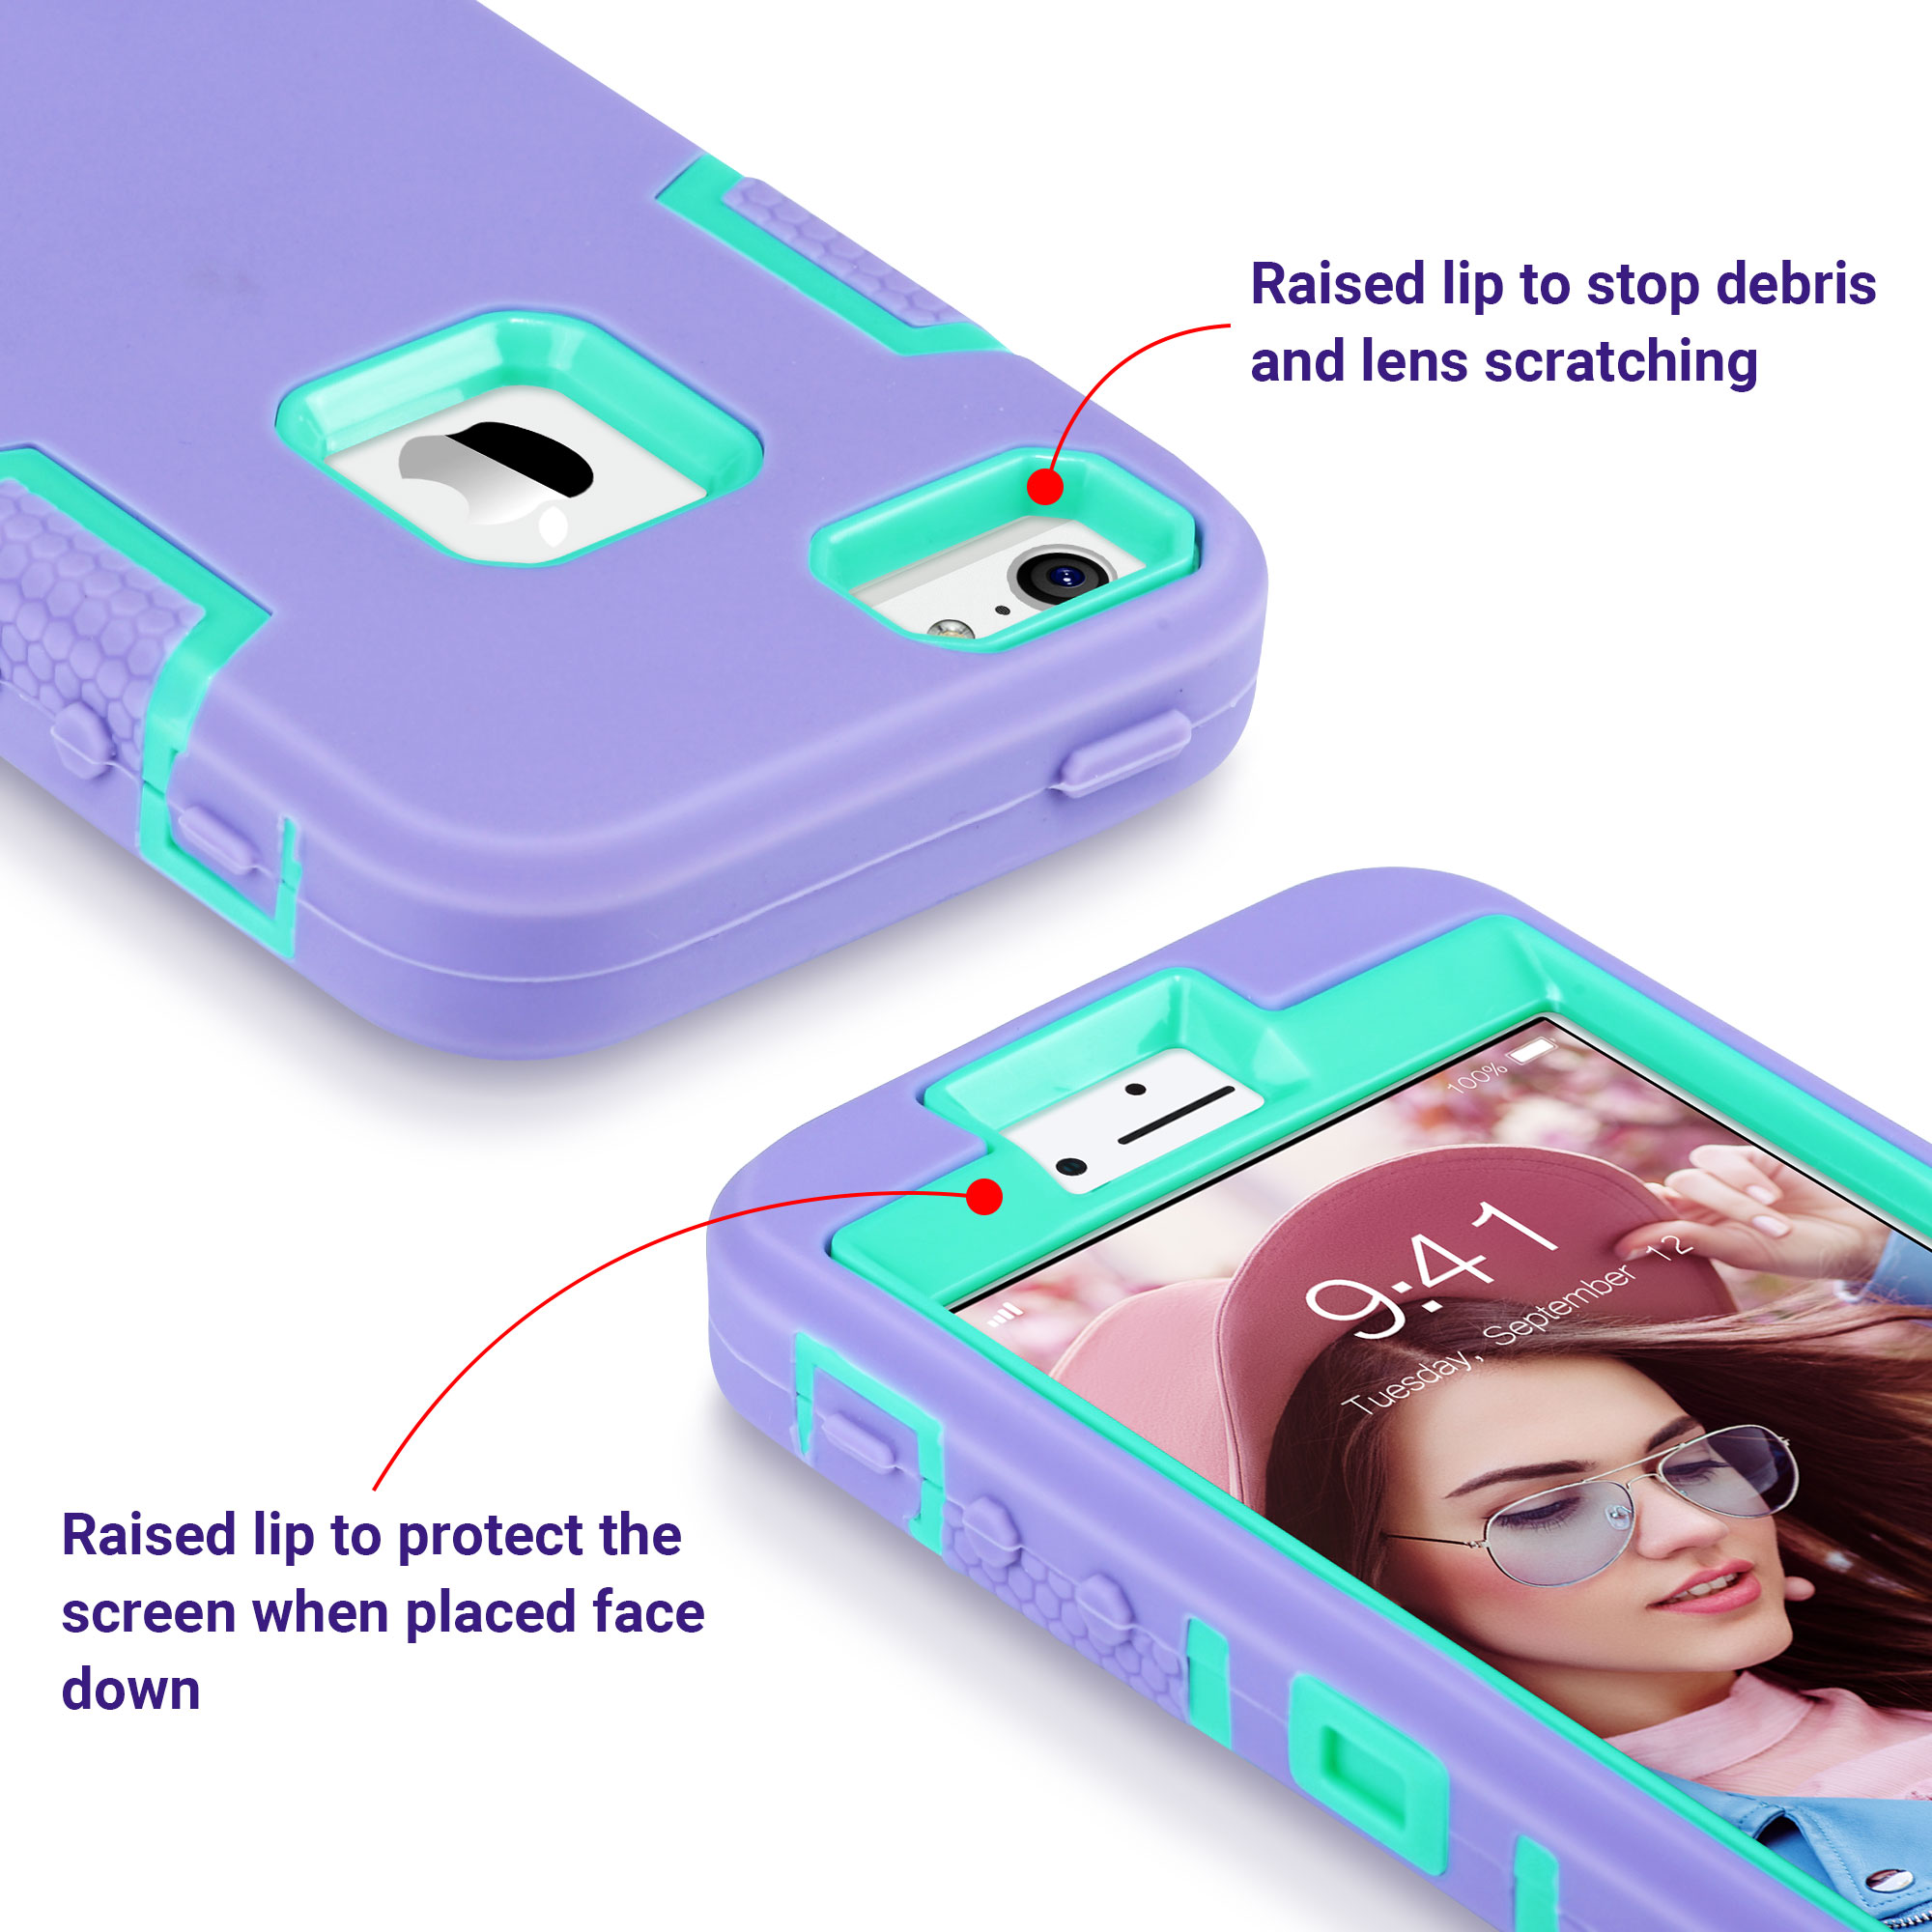 ULAK iPhone SE Case 2016,iPhone 5S 5 Case for Kids,Heavy Duty Shockproof Sport Rugged Phone Case for Apple iPhone 5 5S SE 1st Generation, not fit iPhone SE 2 2020 / 3 2022, Purple - image 3 of 8